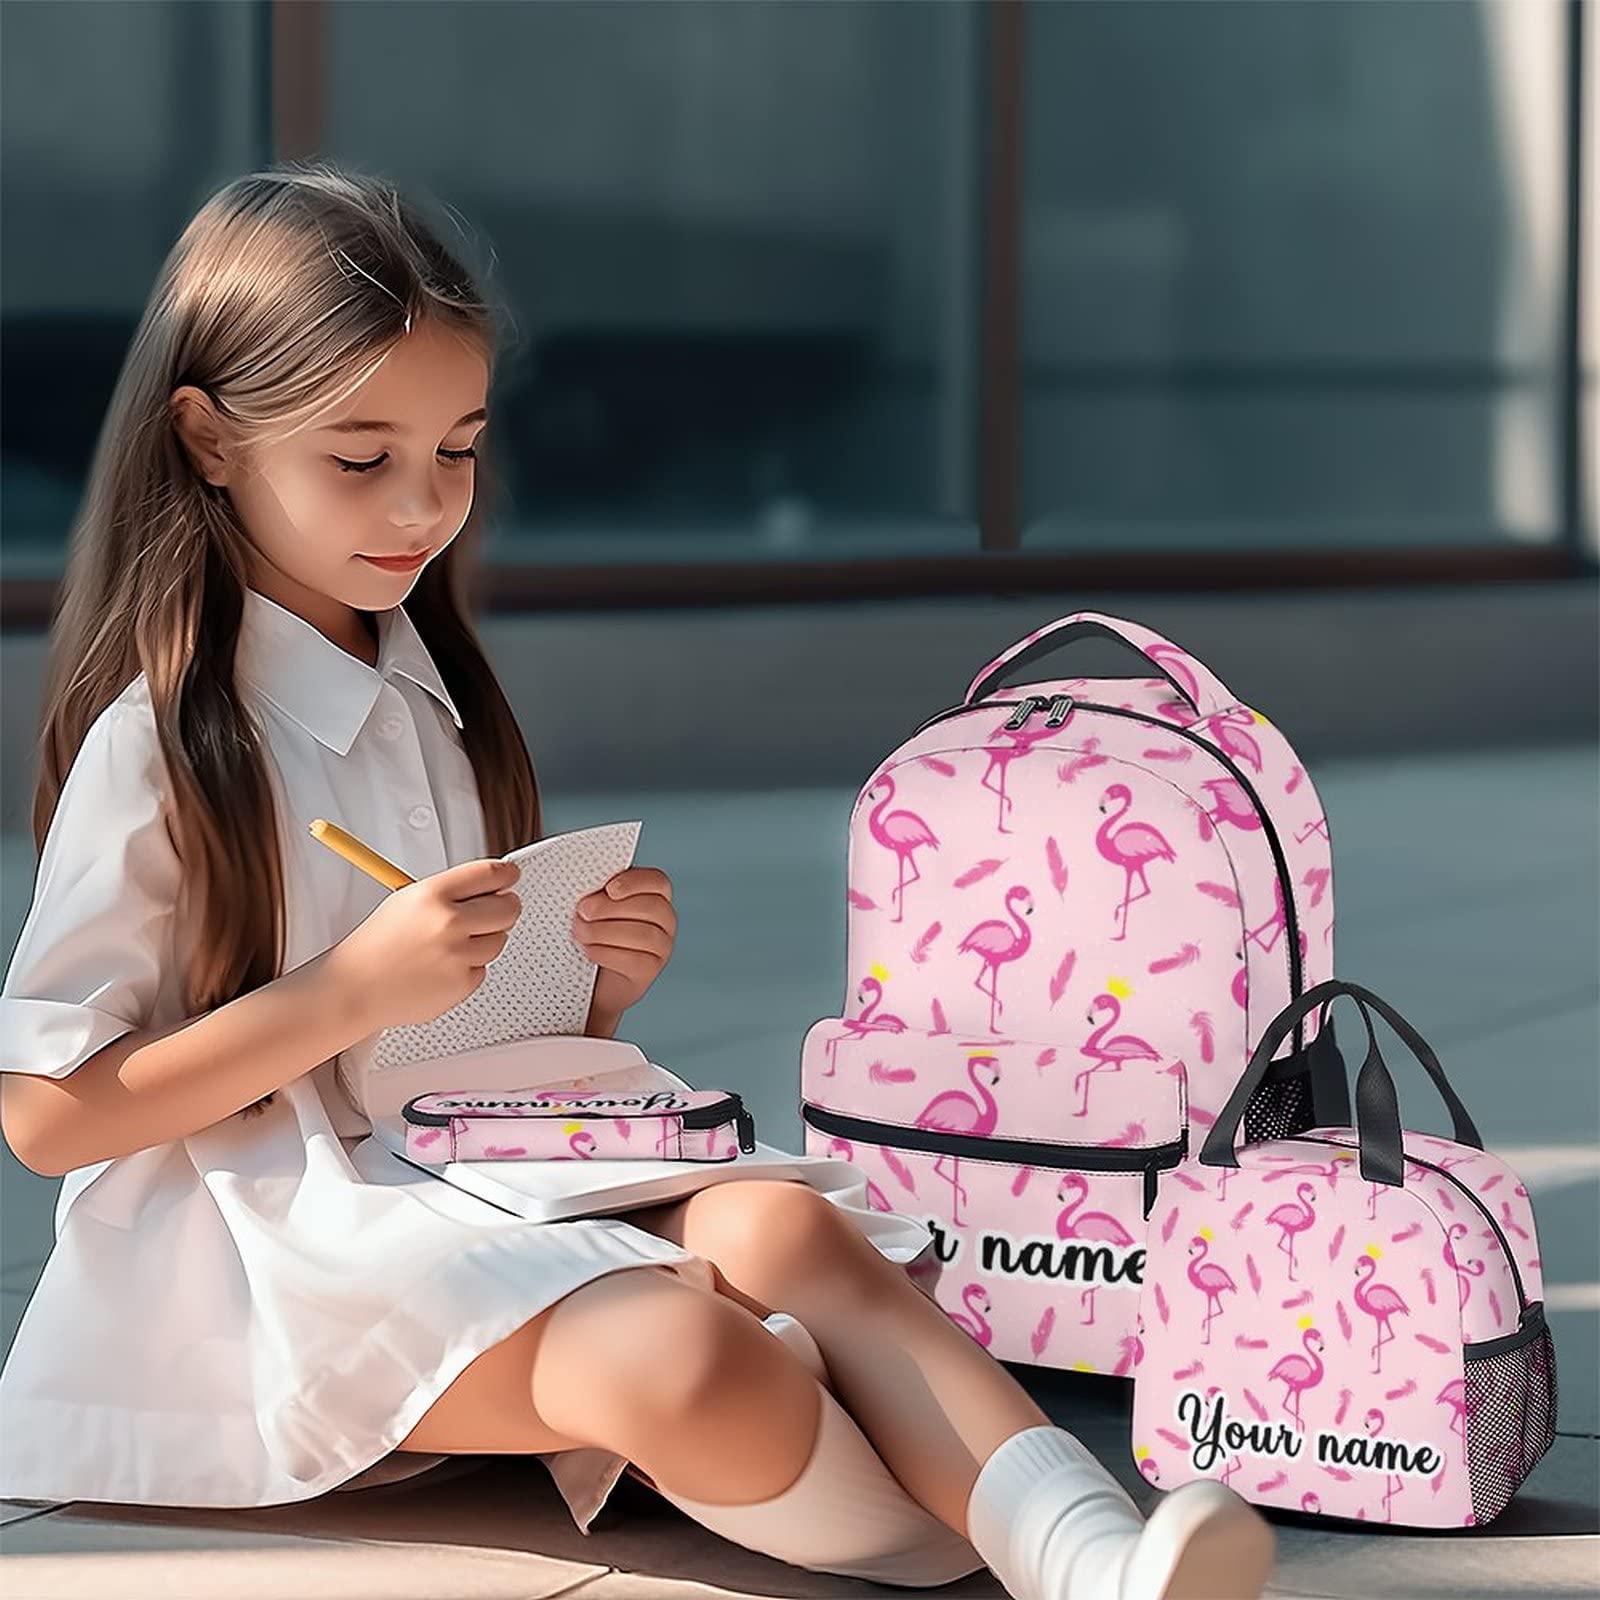 COOPASIA Personalized Flamingo Backpack with Lunch Box - Set of 3 School Backpacks Matching Combo - Cute Pink Bookbag and Pencil Case Bundle